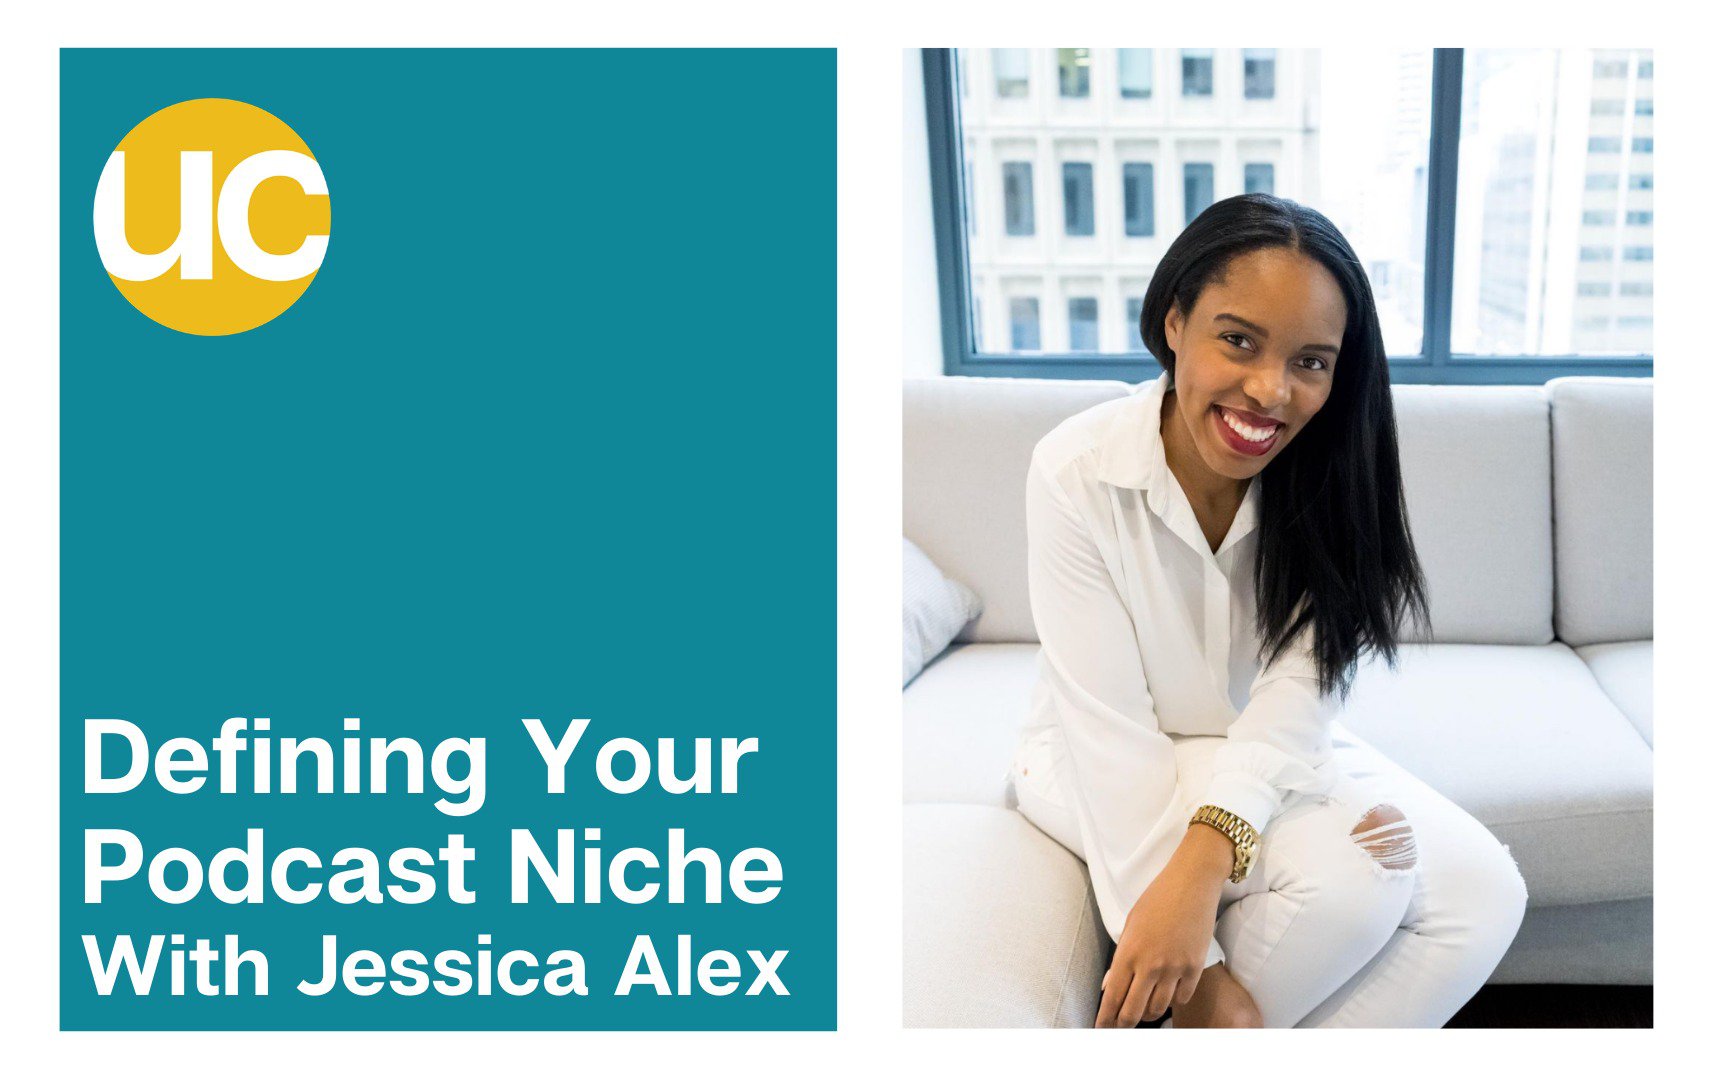 Defining Your Podcast Niche with Jessica Alex - Podcast Episode 50 featured image - Jessica Alex is pictured right wearing a white outfit sitting in front of a bright window.